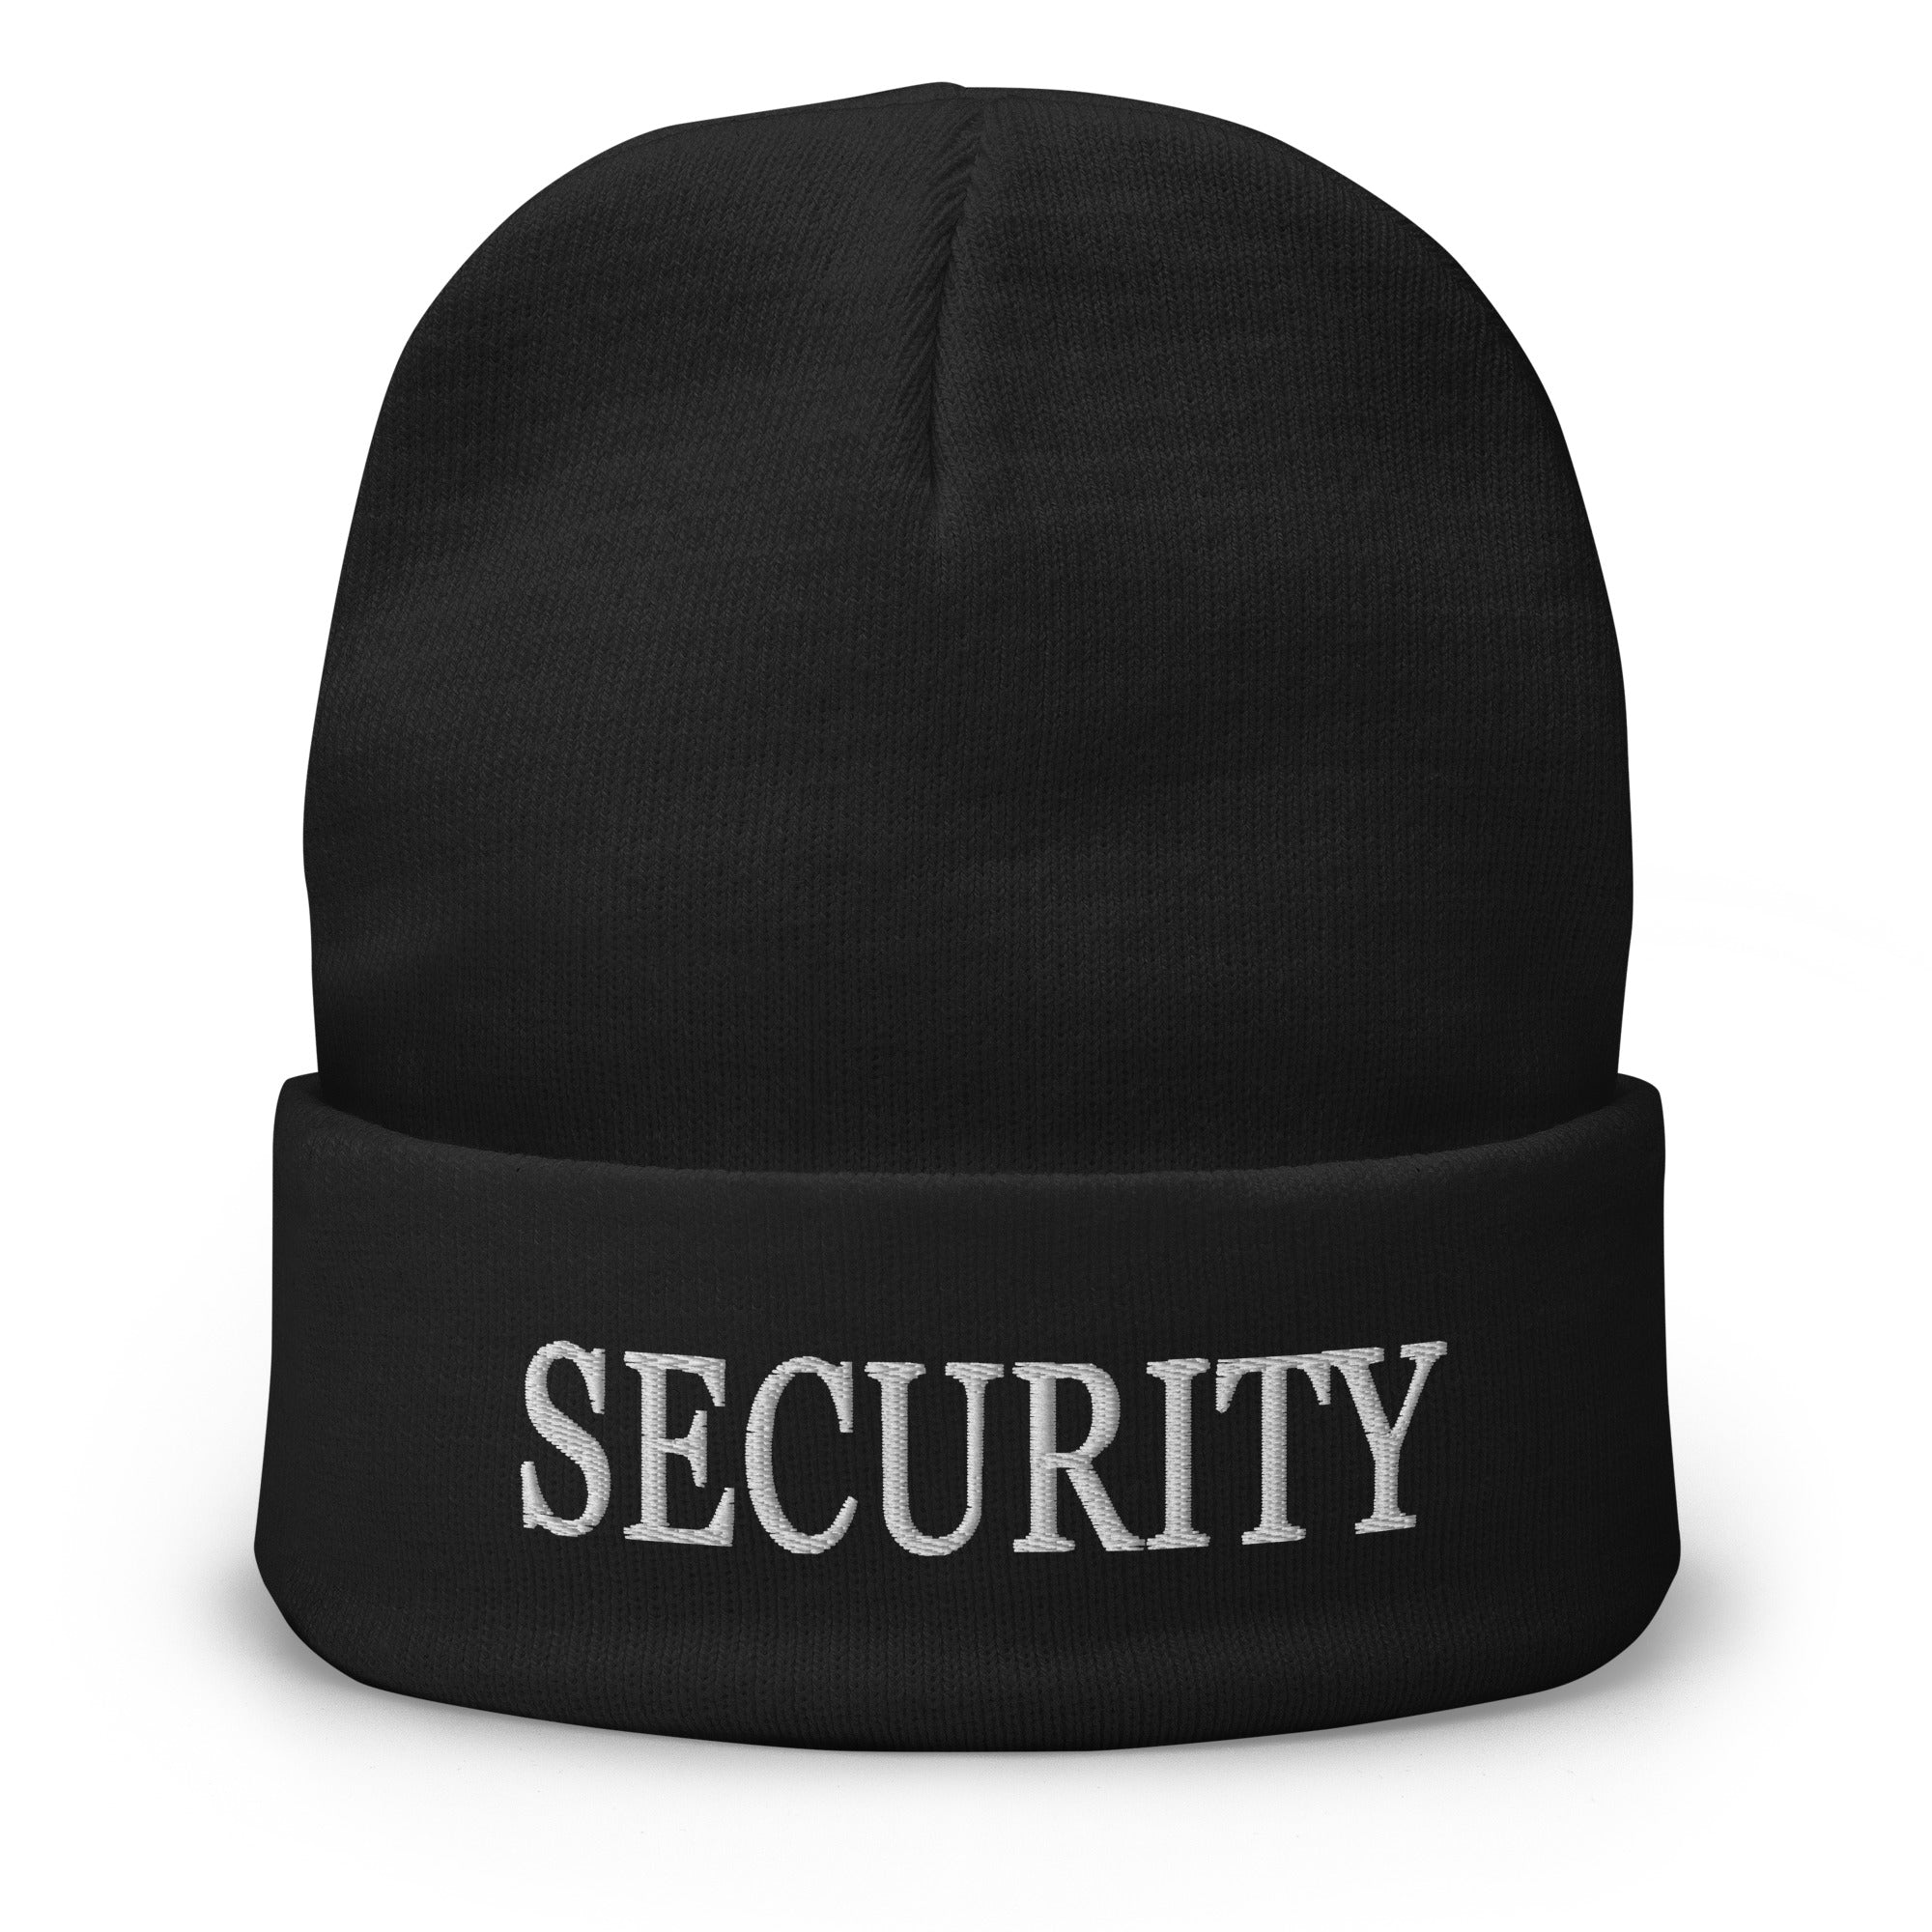 Security Embroidered Cuff Beanie FNAF Cosplay Five Nights at Freddy's - Edge of Life Designs